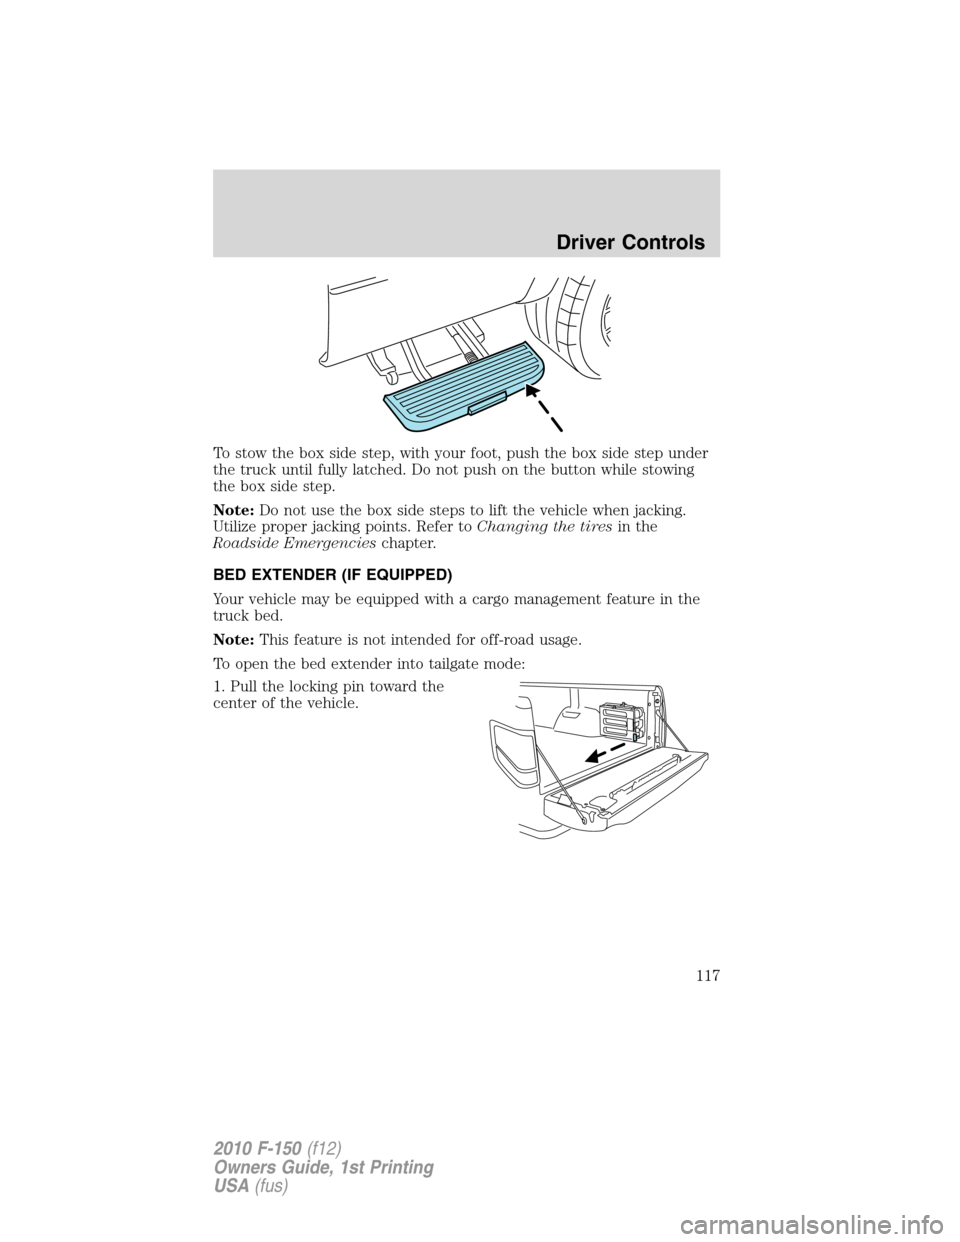 FORD F150 2010 12.G Owners Manual To stow the box side step, with your foot, push the box side step under
the truck until fully latched. Do not push on the button while stowing
the box side step.
Note:Do not use the box side steps to 